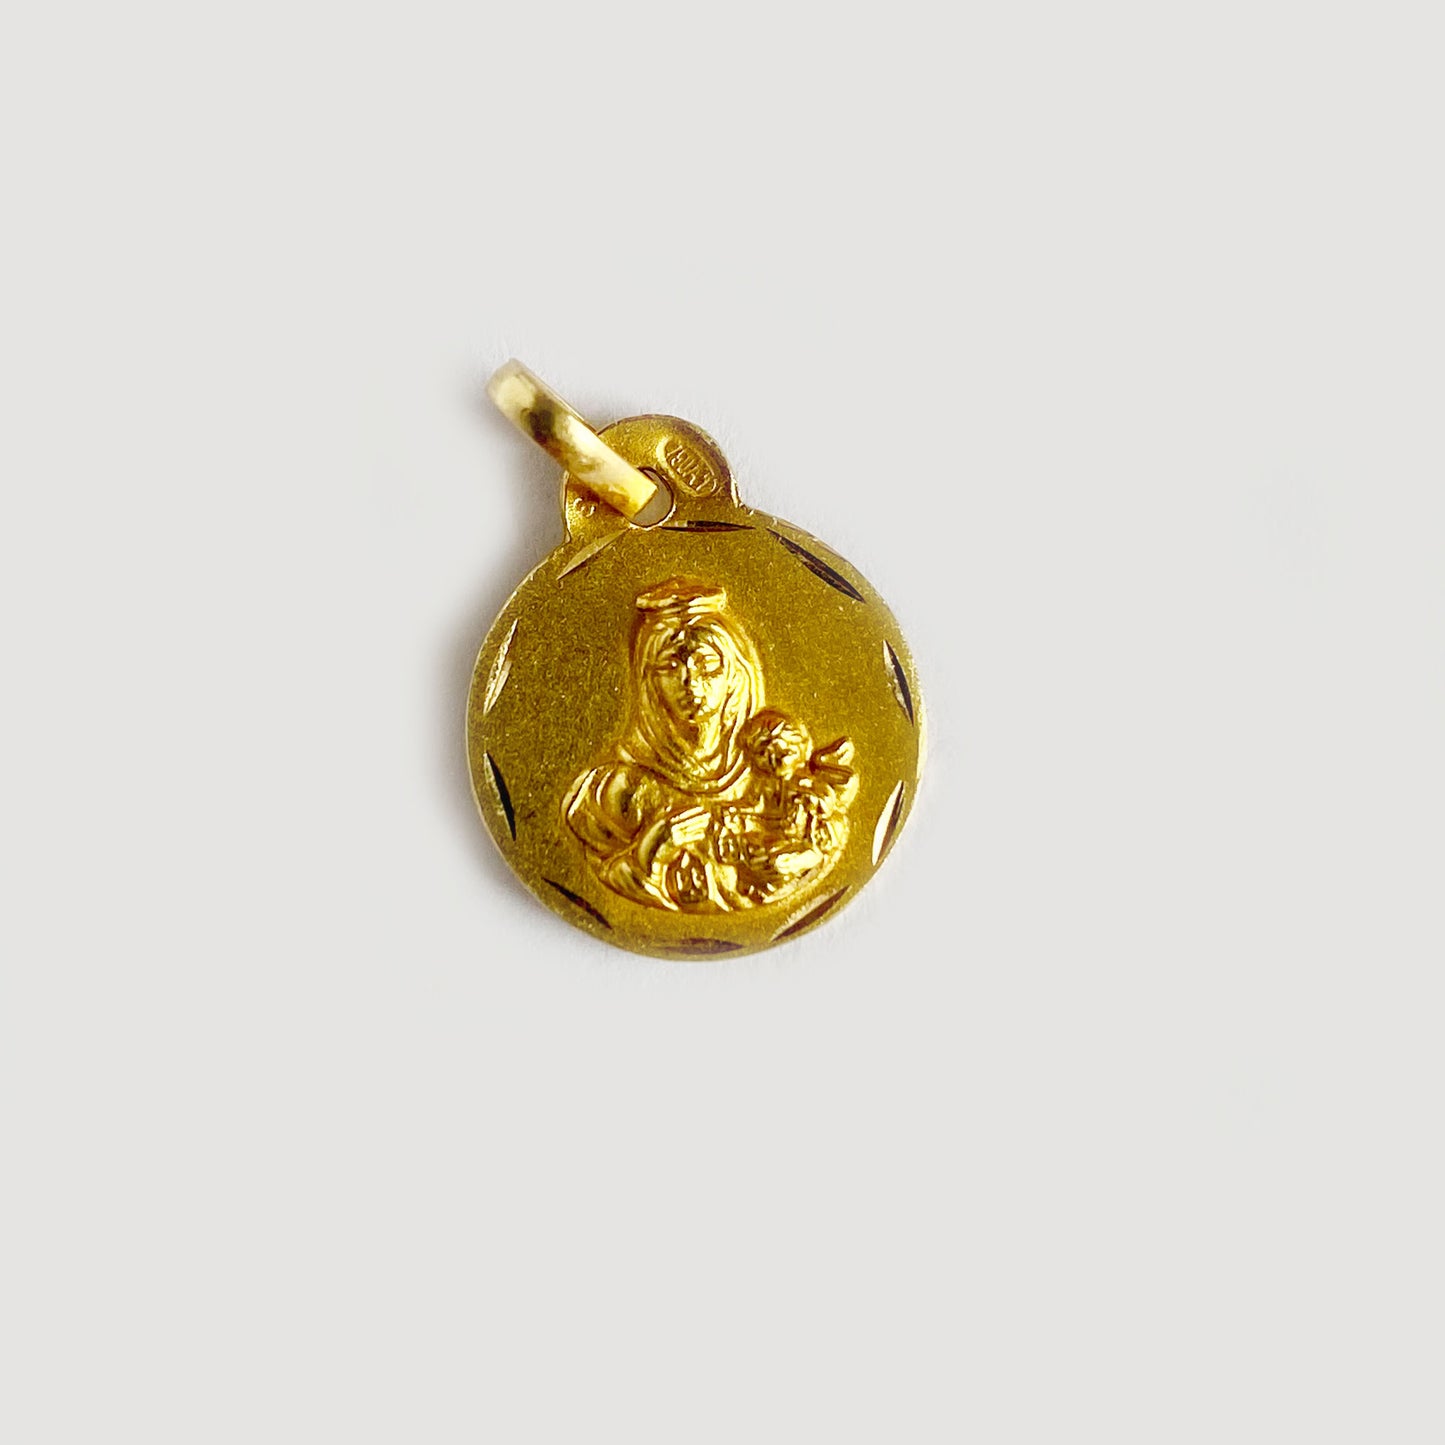 Vintage 18k Yellow Gold Religious Medal Pendant,Holy Mary, Jesus Scared Heart